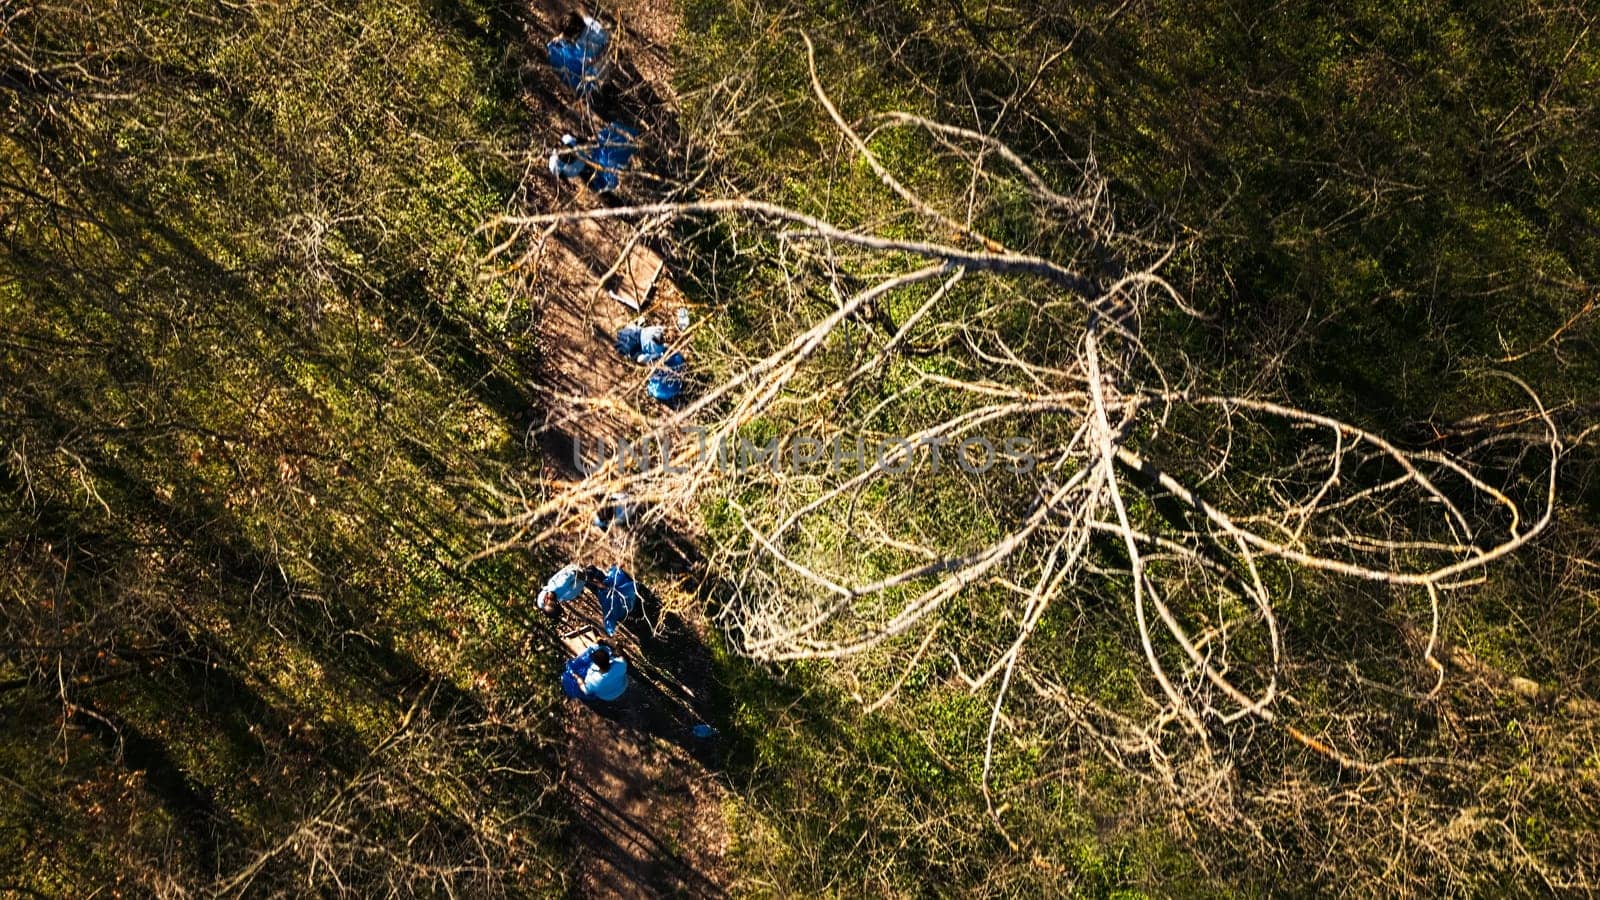 Aerial view of volunteers doing litter cleanup in a forest area, collecting rubbish and plastic waste, fighting illegal dumping. Activists cleaning to woods and recycling for nature conservation.